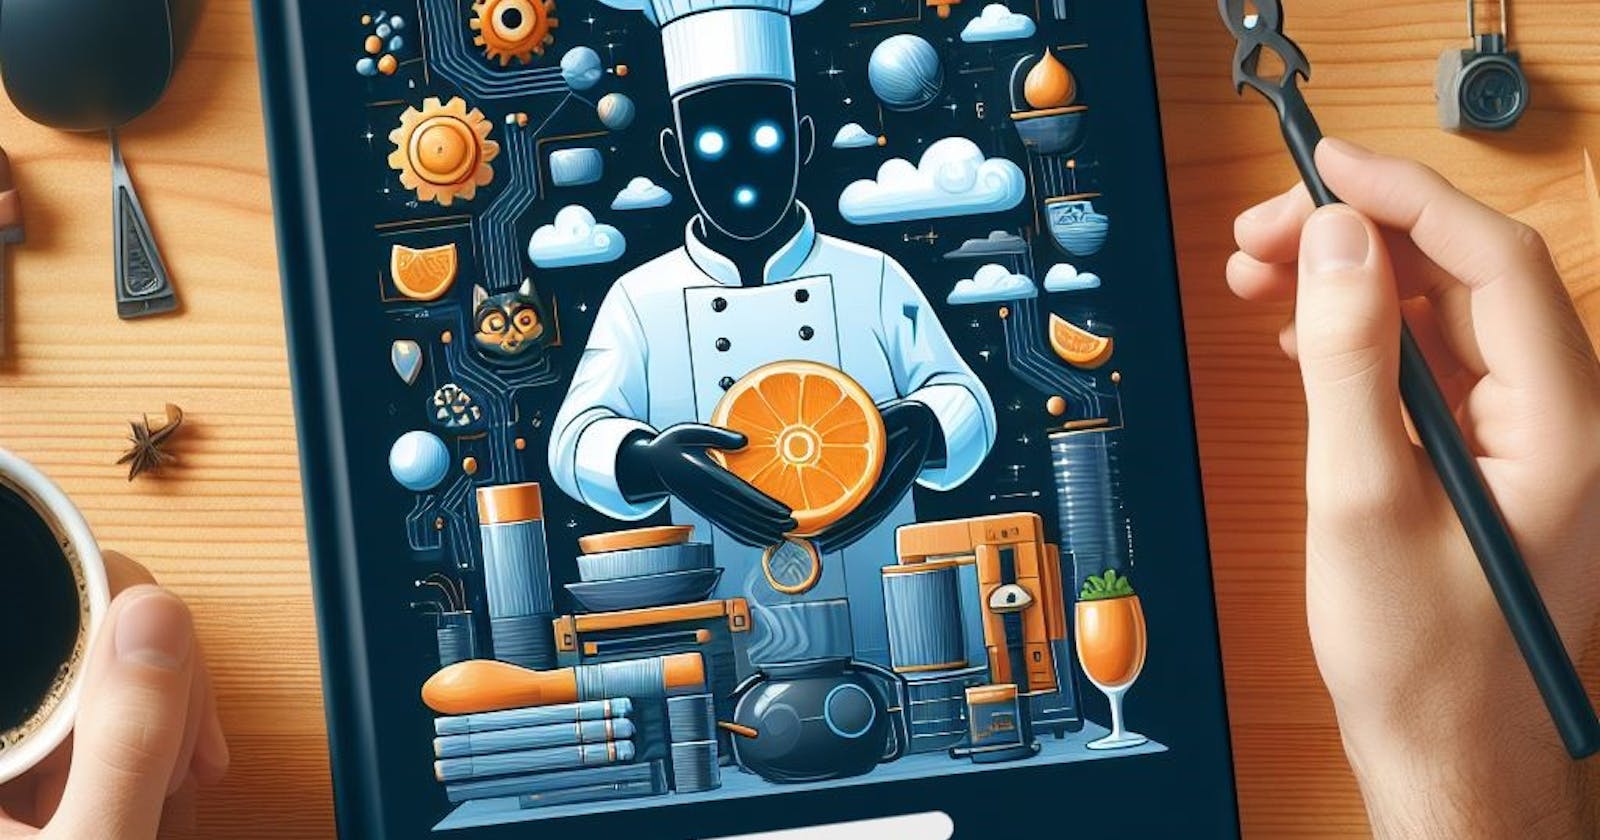 ChefCraft: Crafting a Seamless AWS EC2 Experience with Chef Recipes and Cookbooks